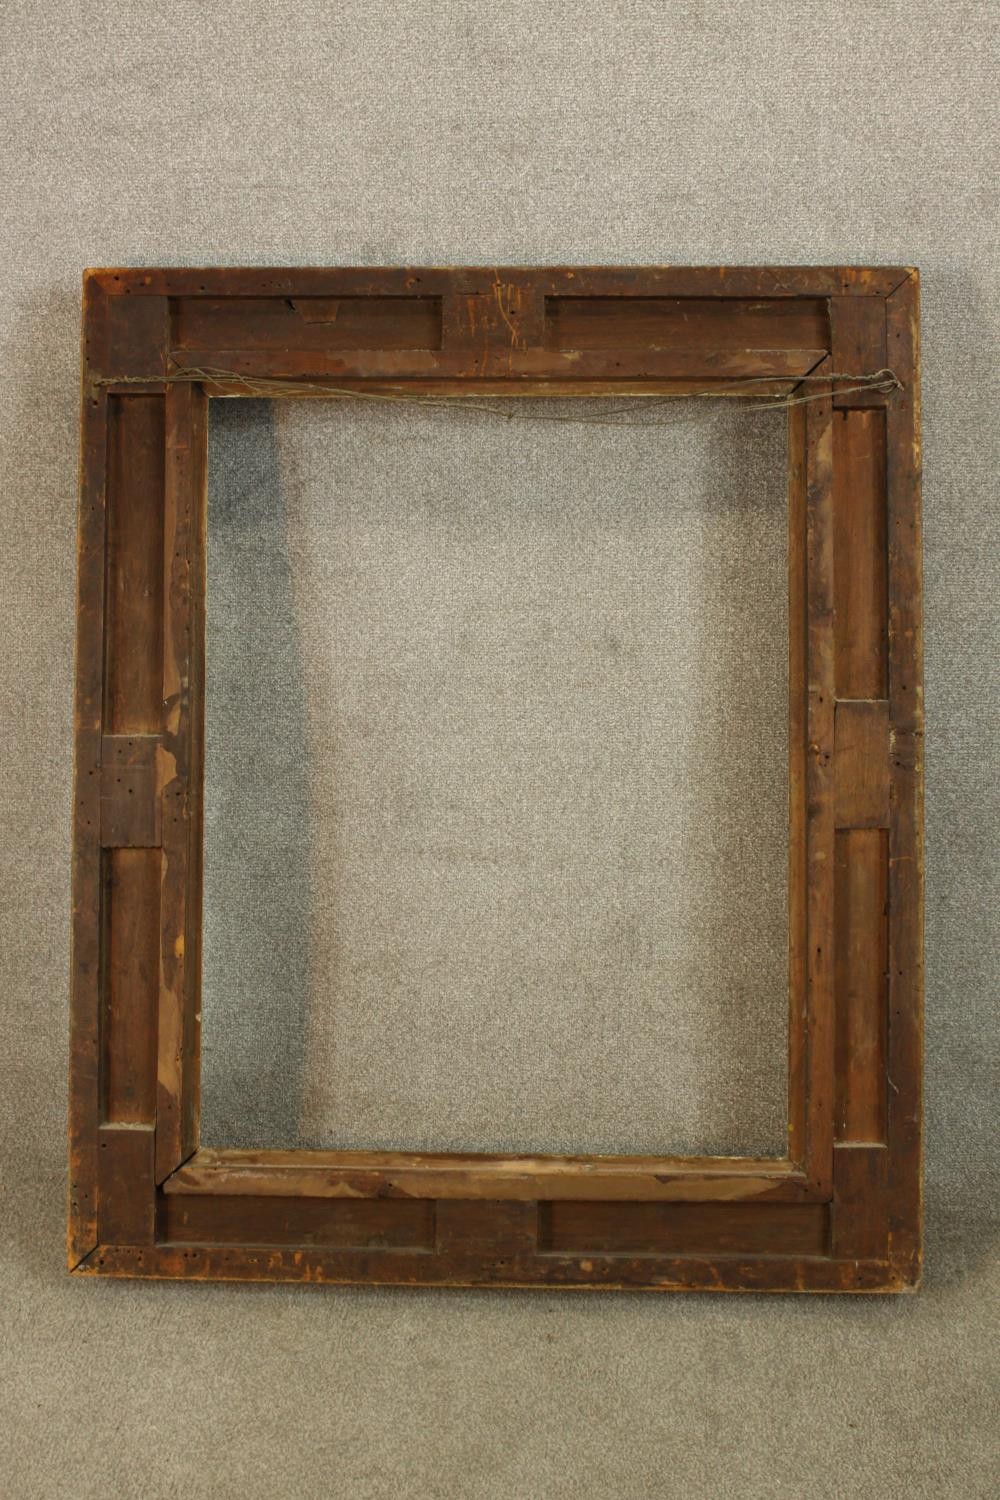 A 19th/ early 20th century Rococo style rectangular gilt frame. H.120 W.100cm. - Image 3 of 3